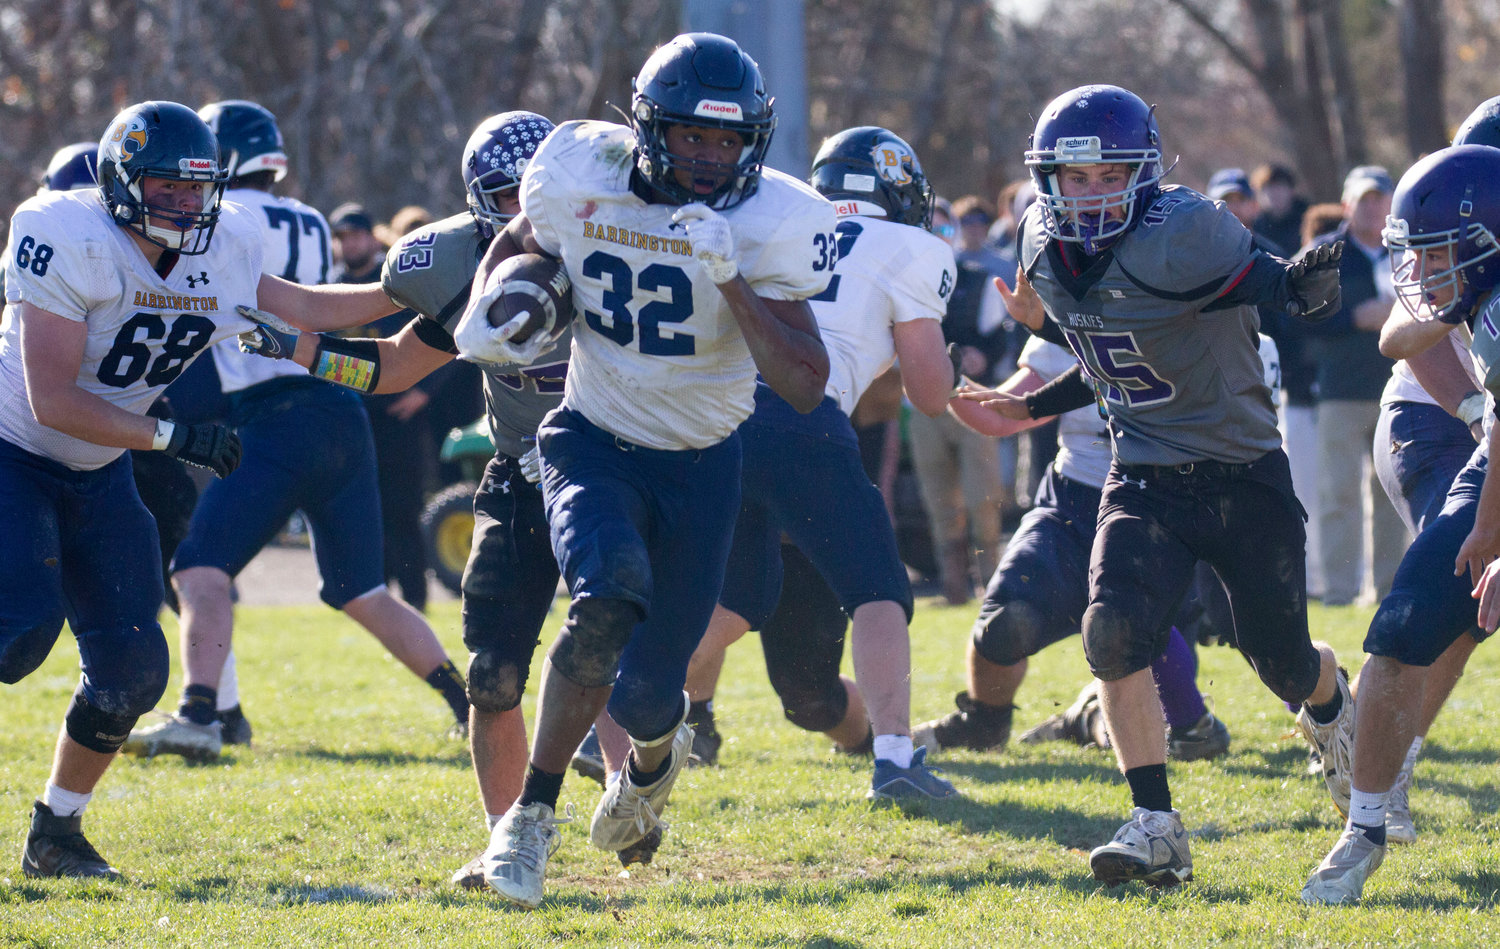 Eagles running back Payton Murphy rambles for a touchdown in the second quarter.